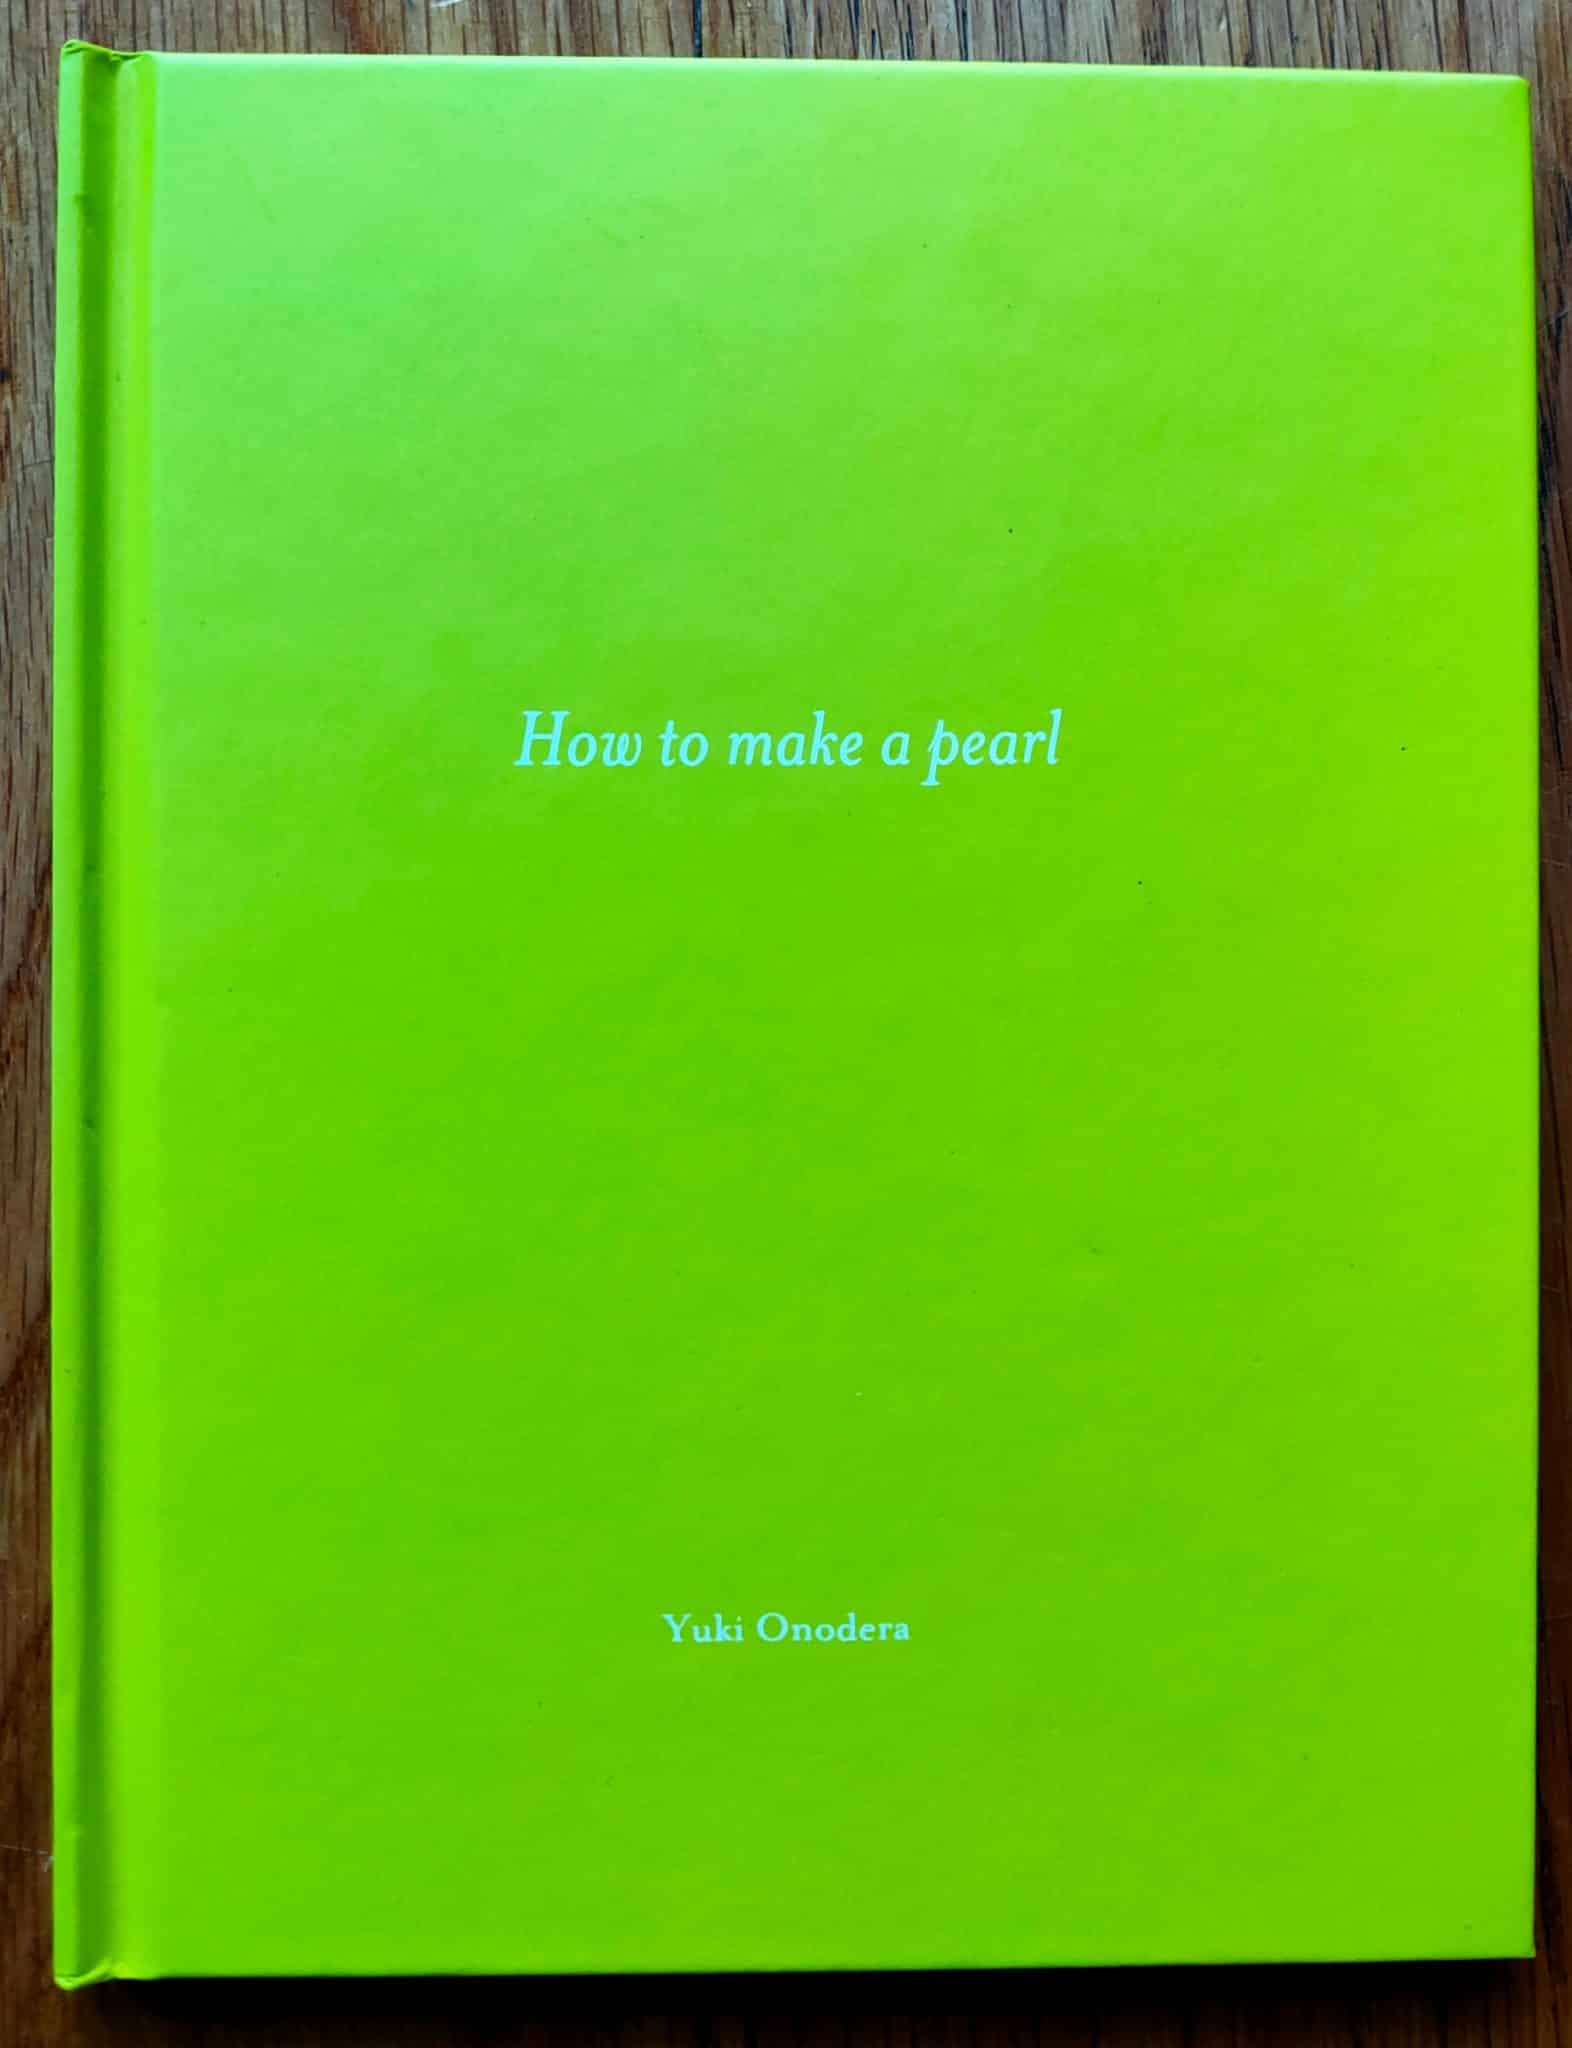 Buy How to Make a Pearl (One Picture Book) by Yuki Onodera with 